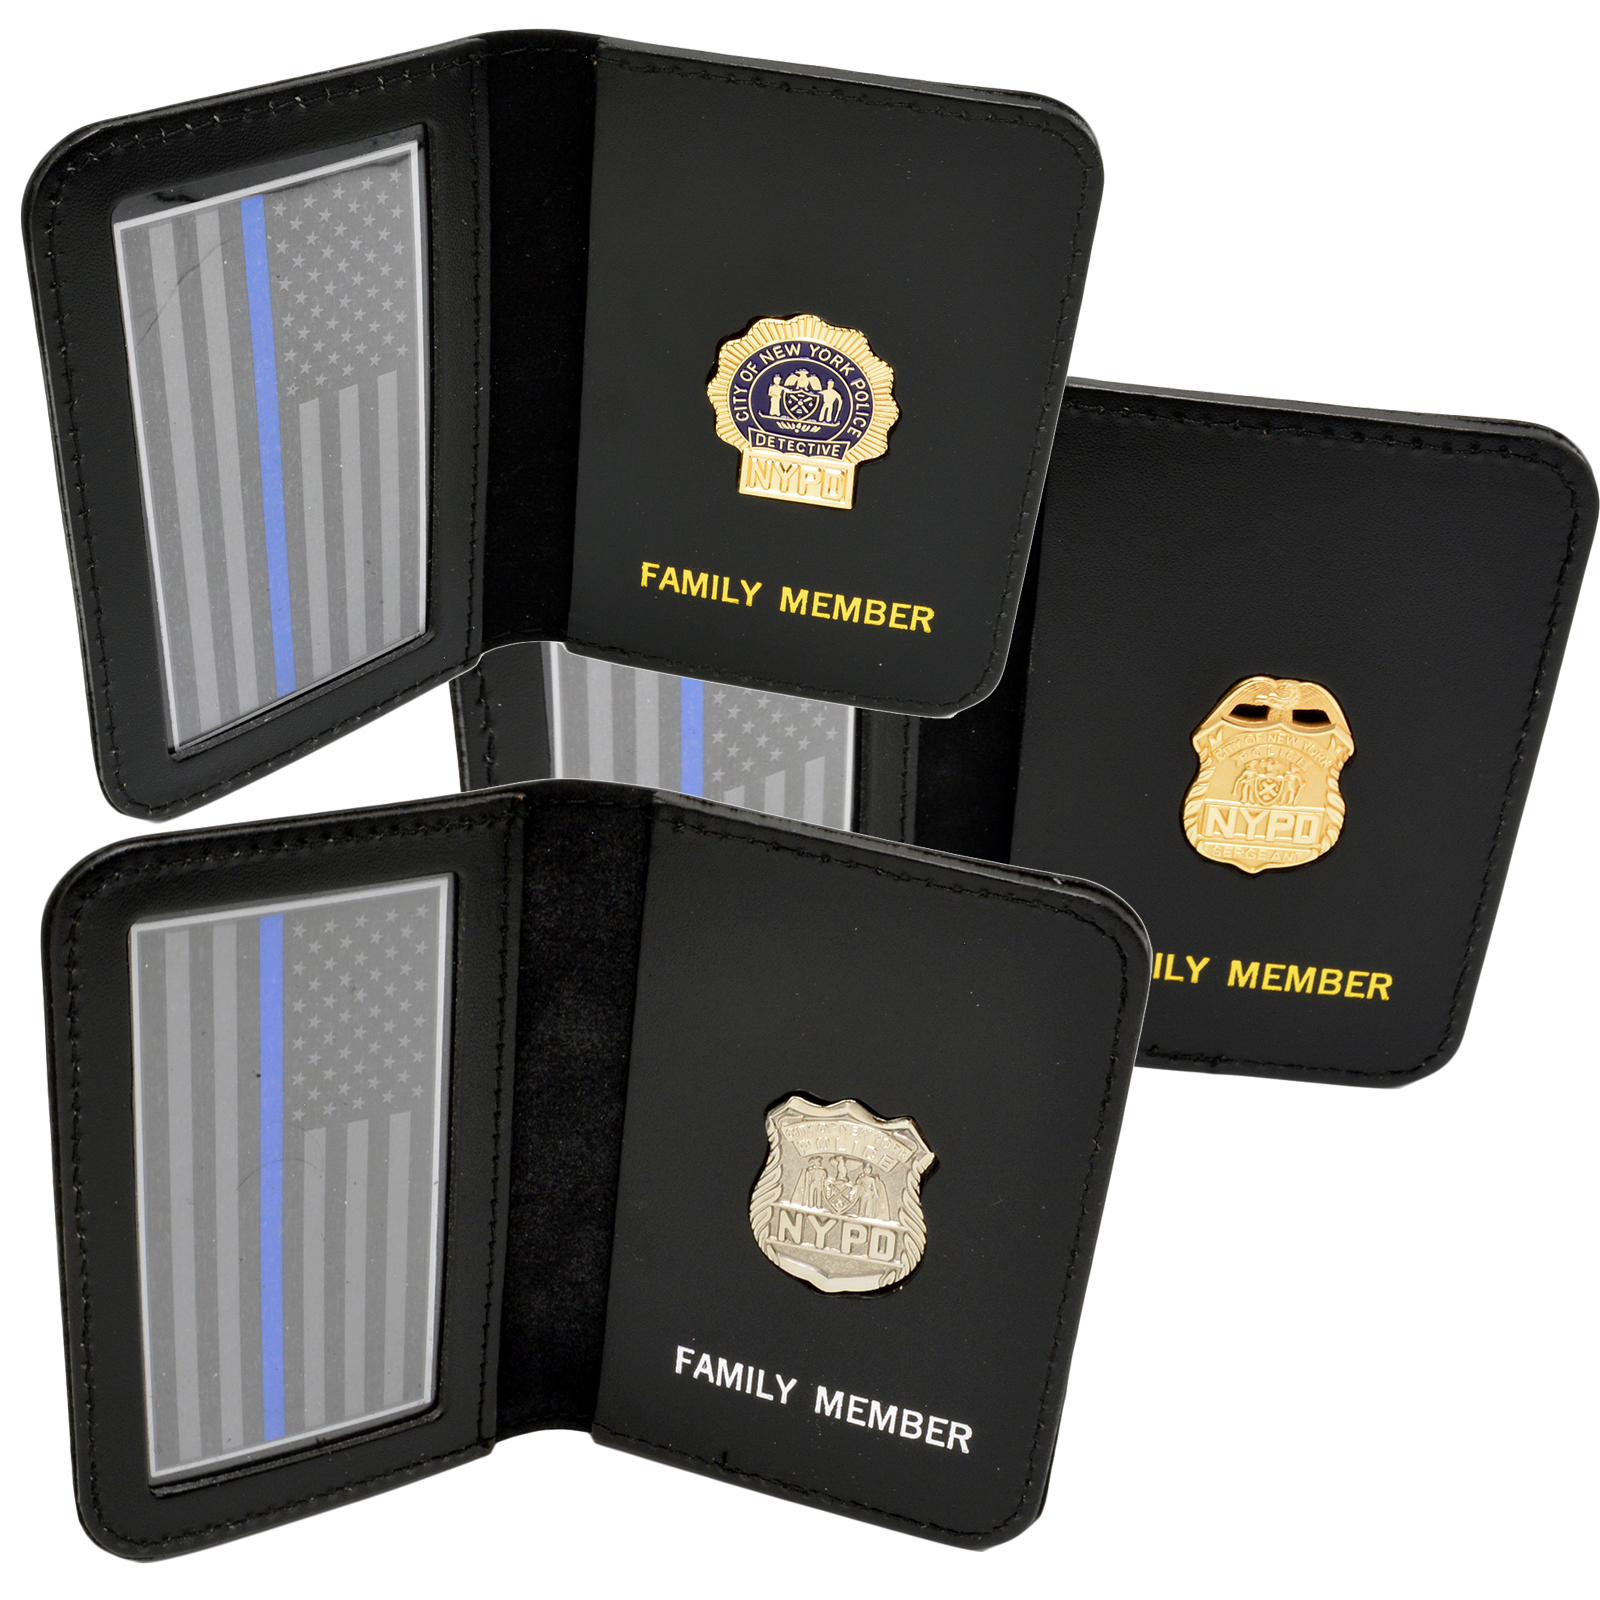 THIN BLUE LINE OFFICER SON MINI SHIELD WALLET ID HOLDER FITS NYPD